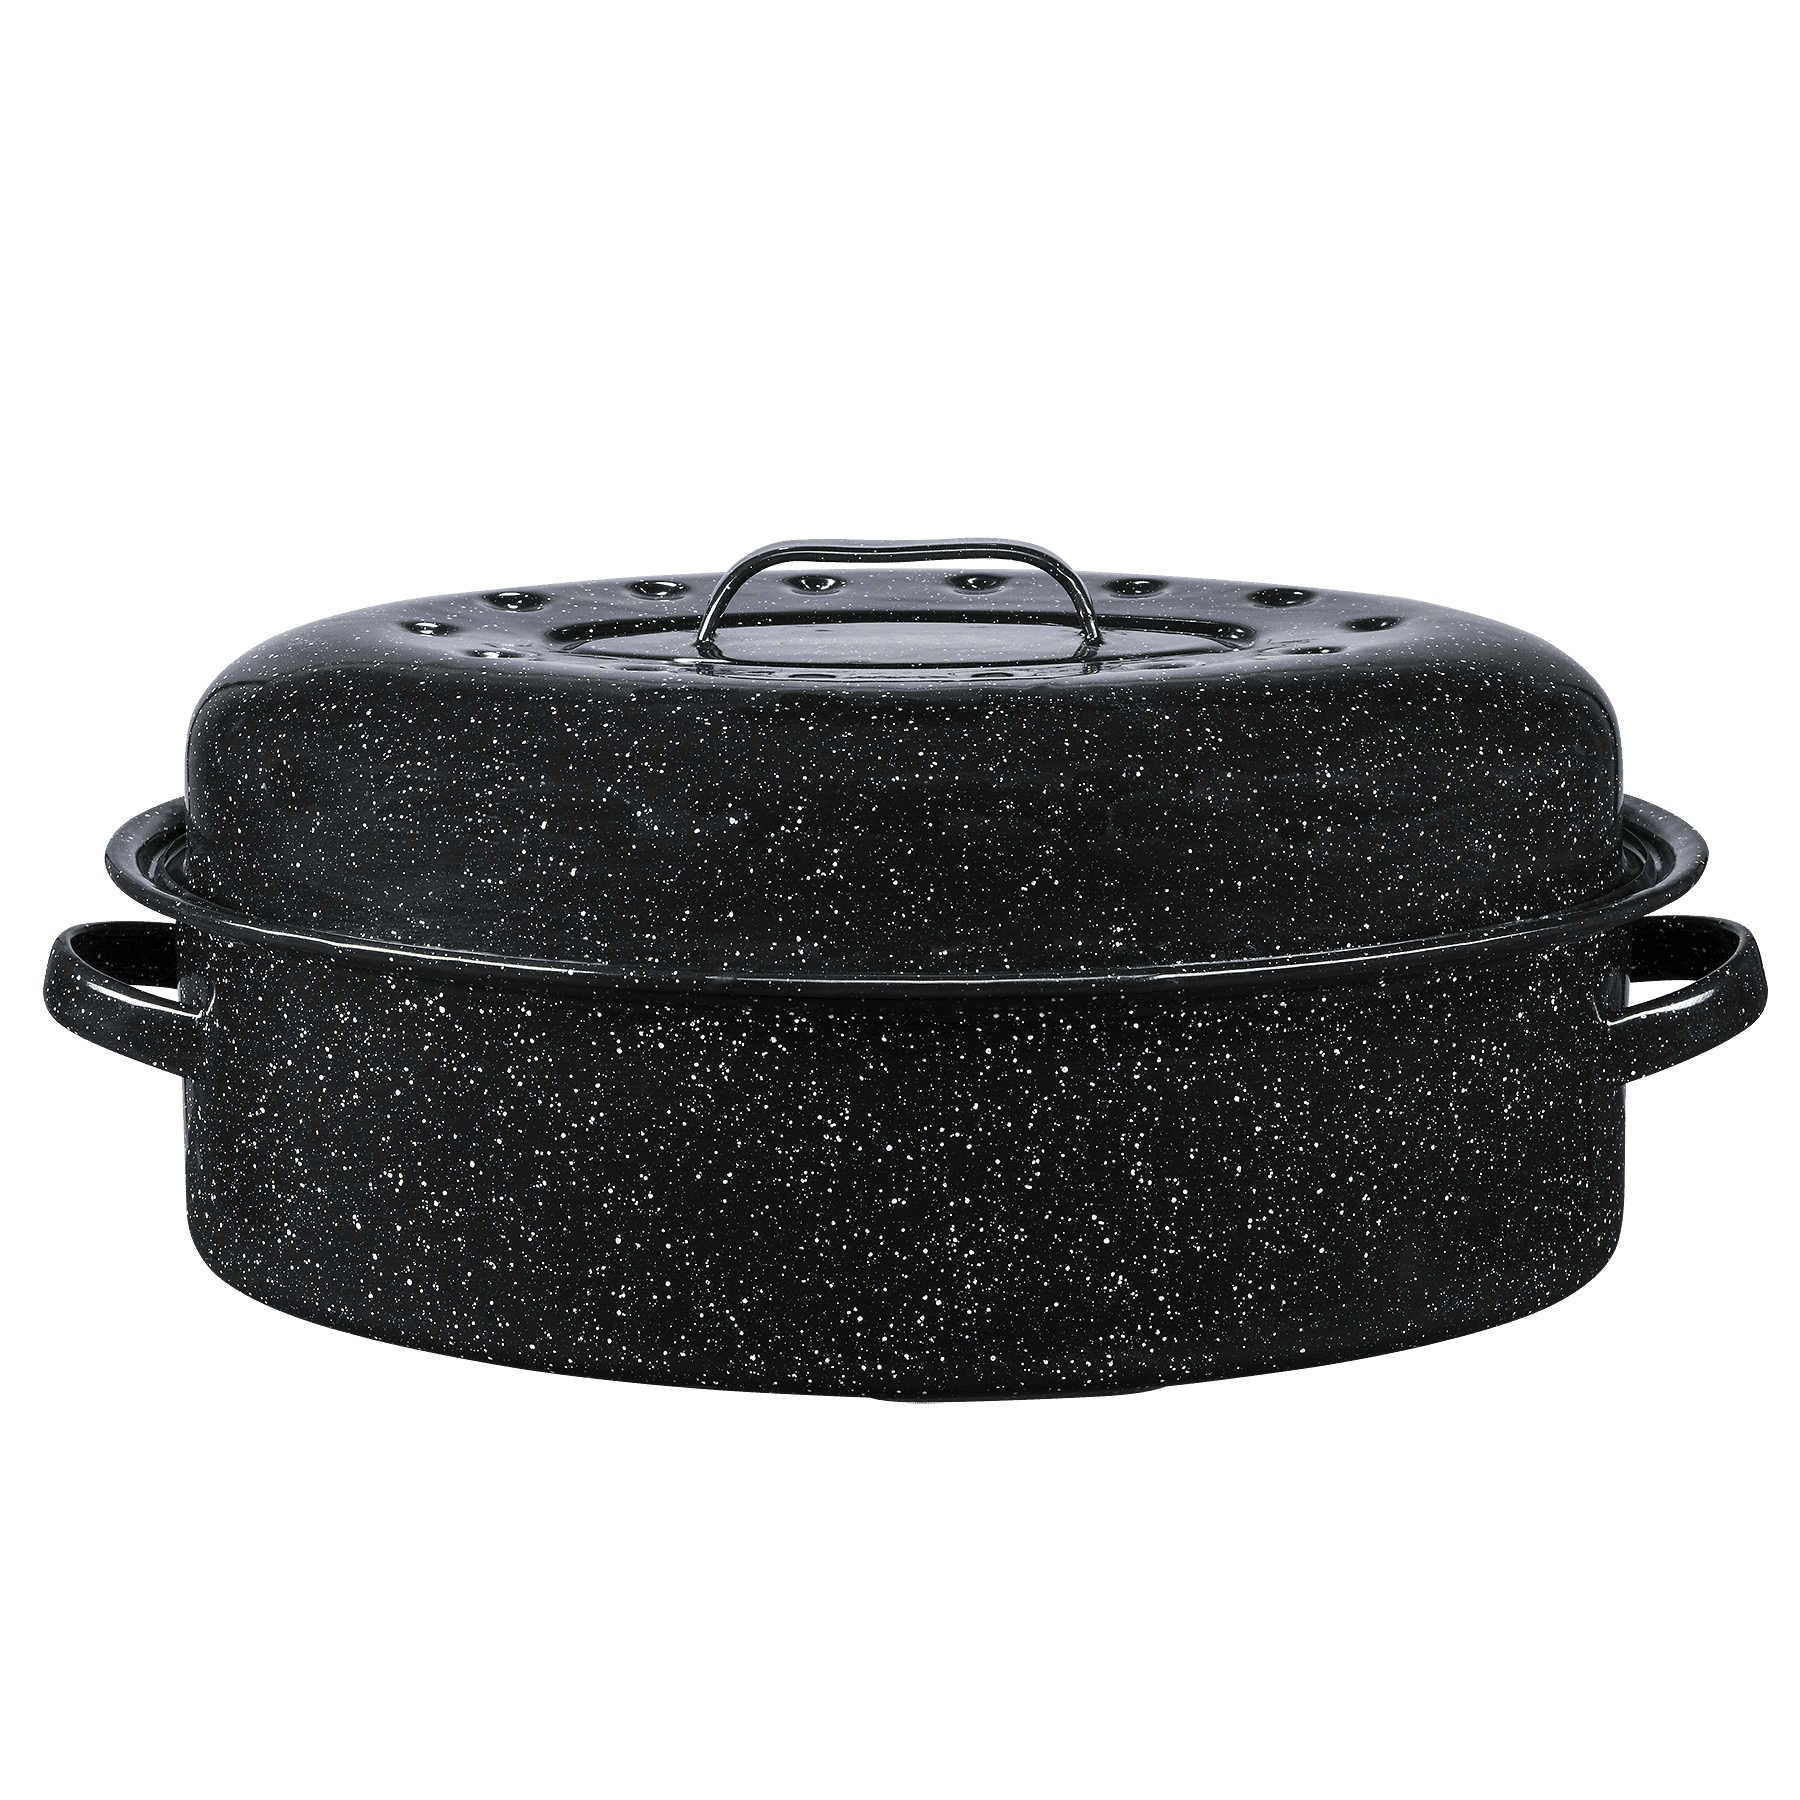 Granite Stone Oval Roaster Pan, Large 19.5” Ultra Nonstick Roasting Pan  with Lid 